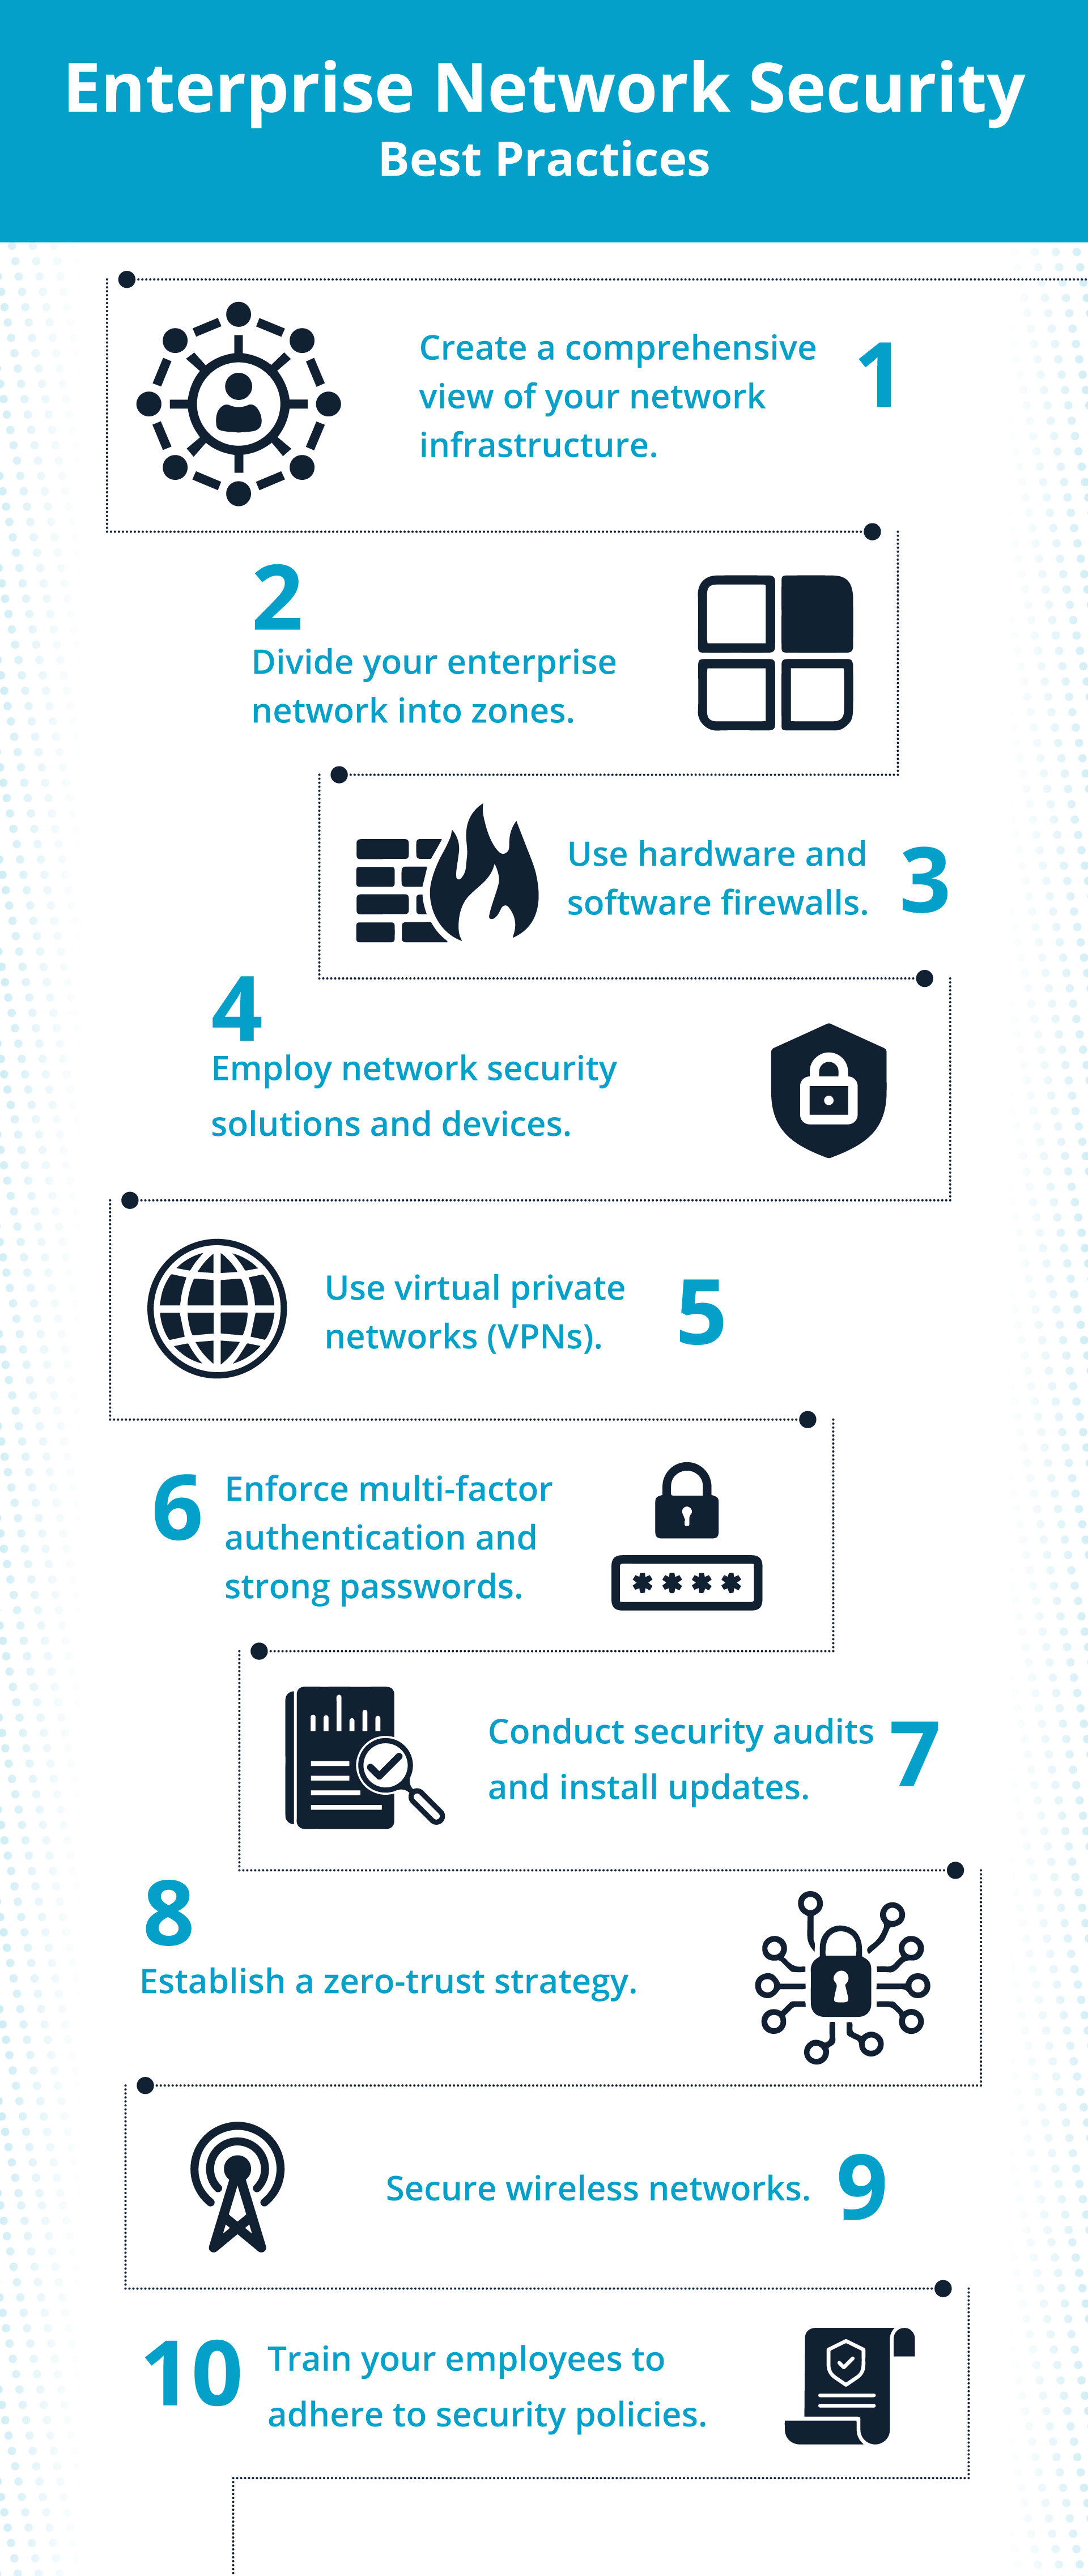 10 impactful best practices for enterprise network security.